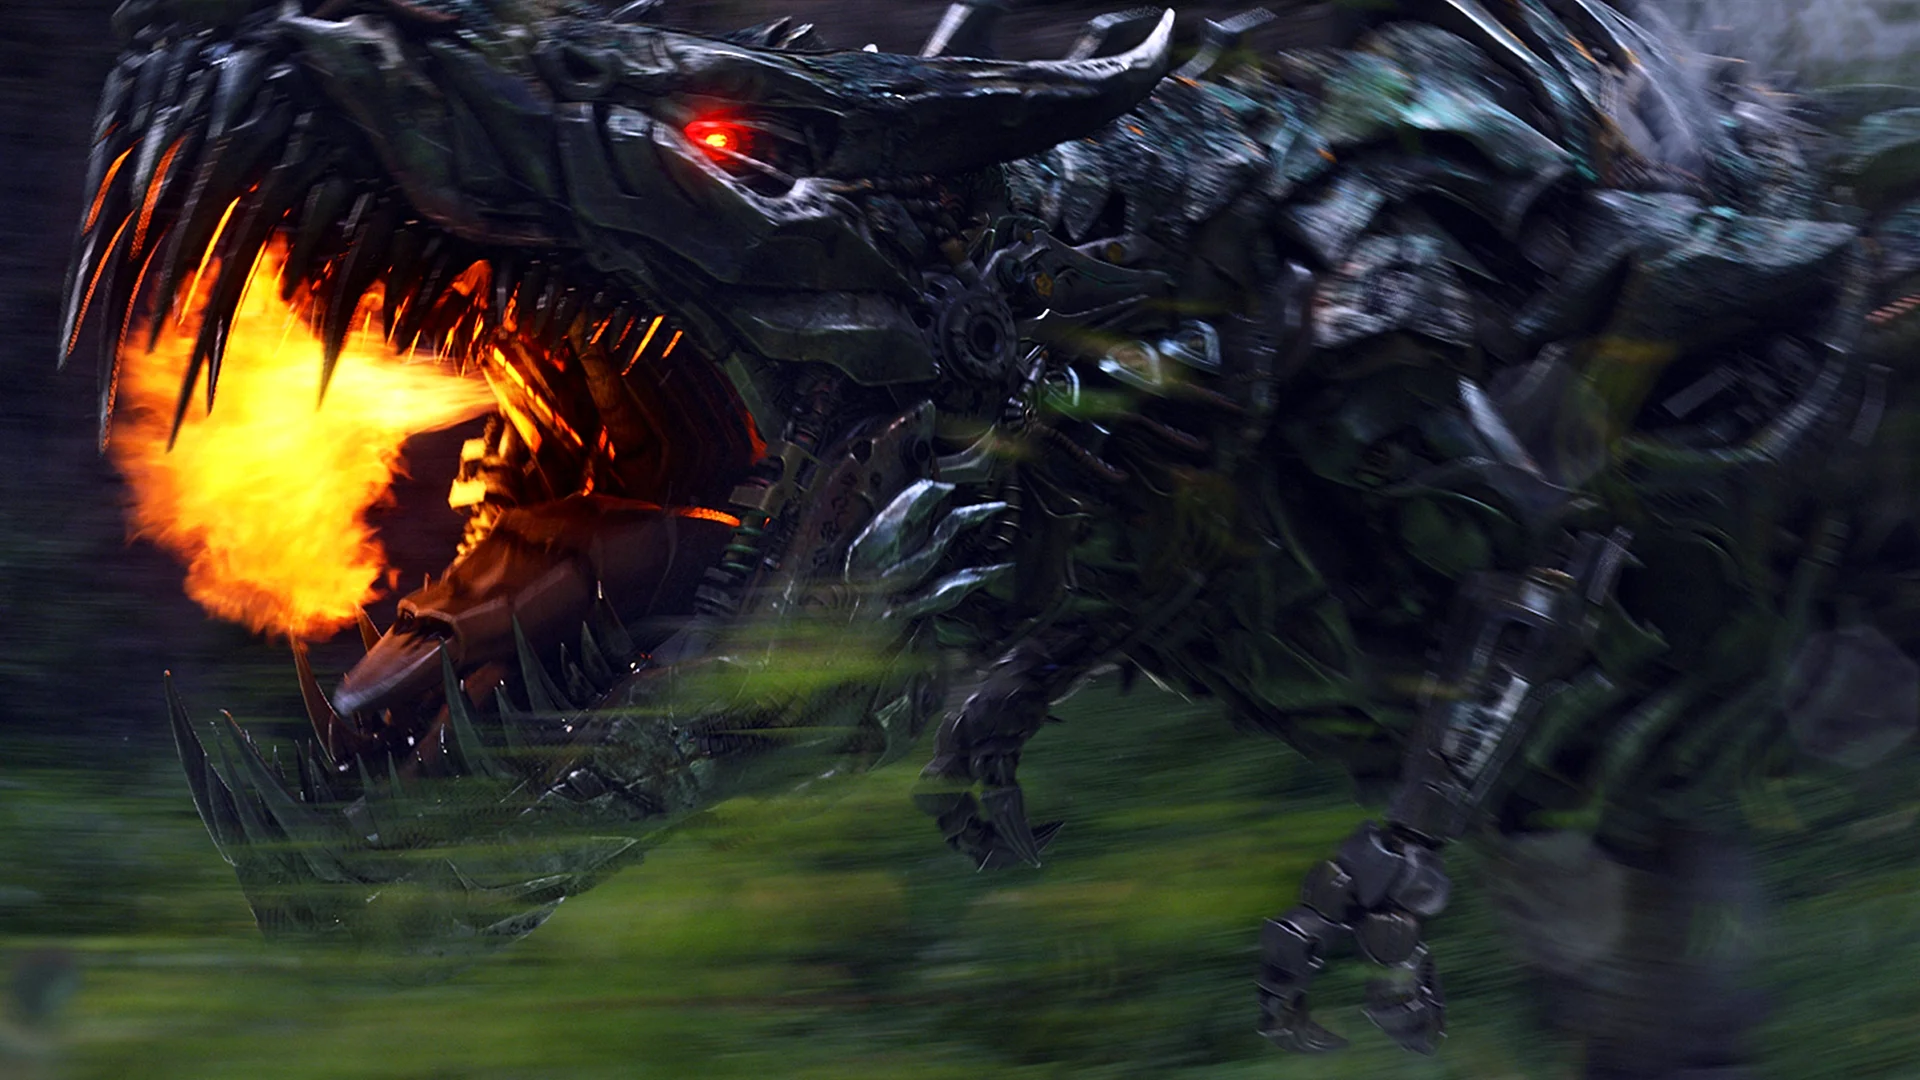 Transformers 4 Age Of Extinction 2014 Wallpaper